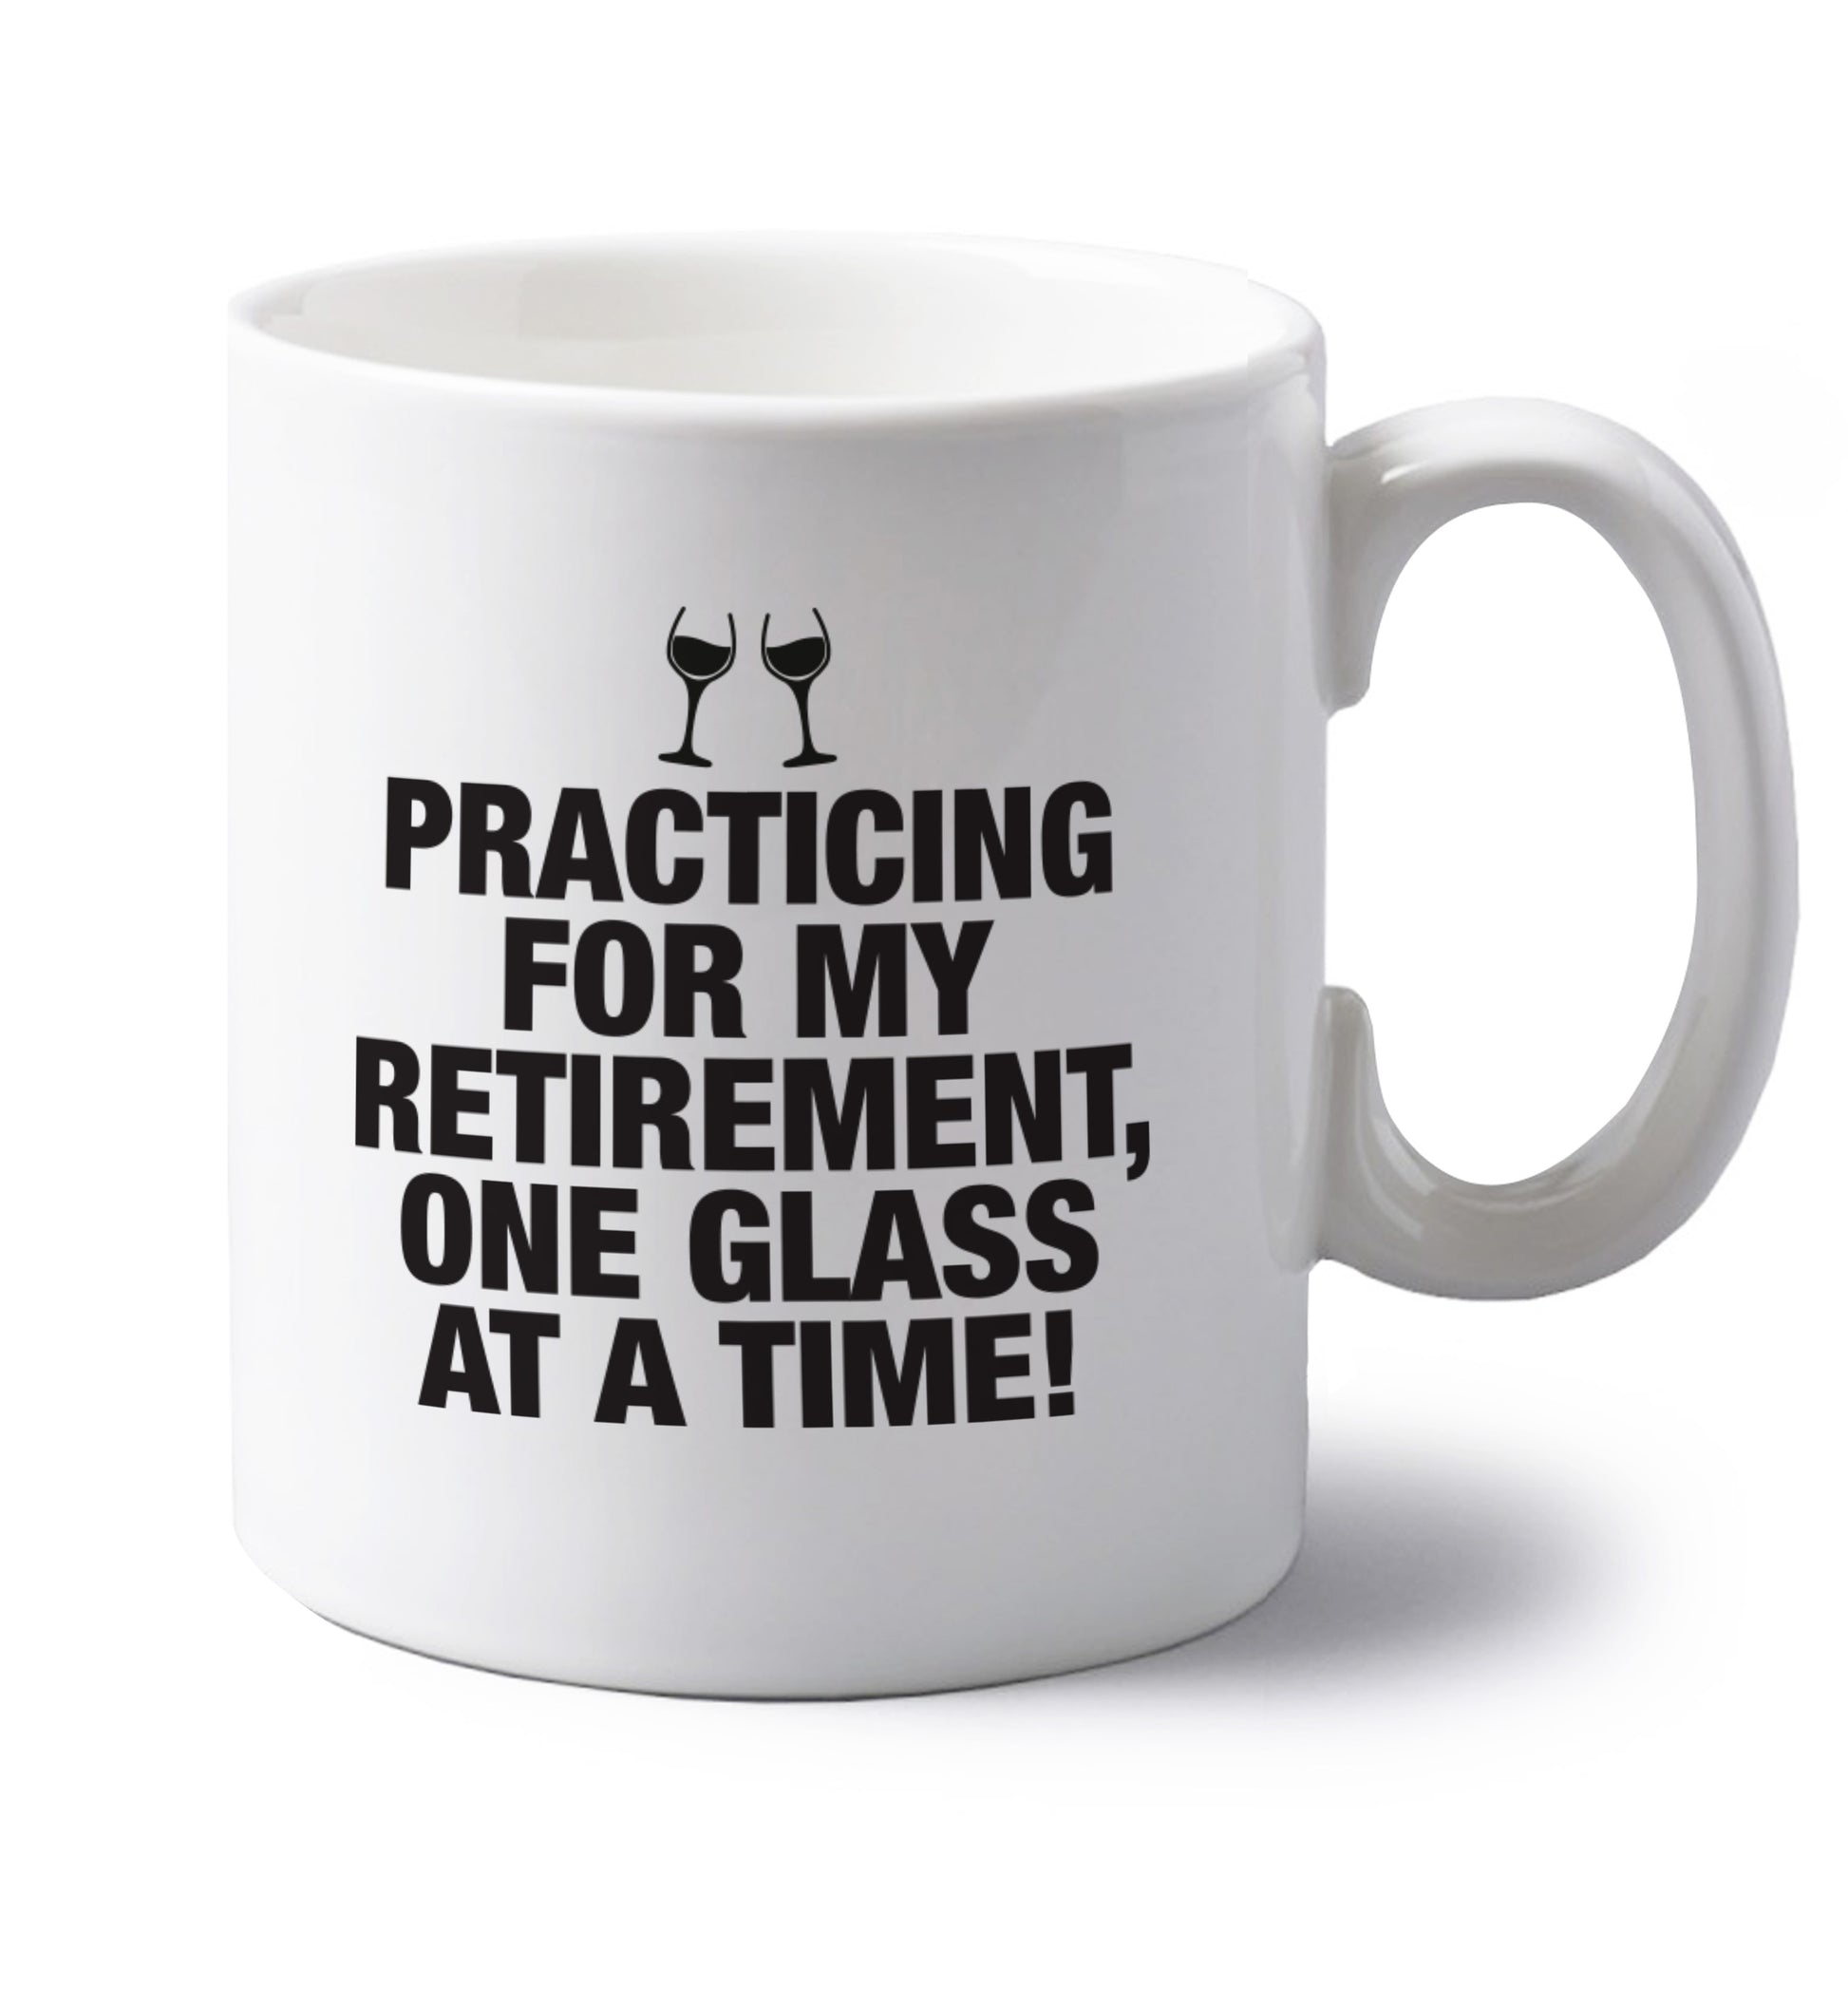 Practicing my retirement one glass at a time left handed white ceramic mug 